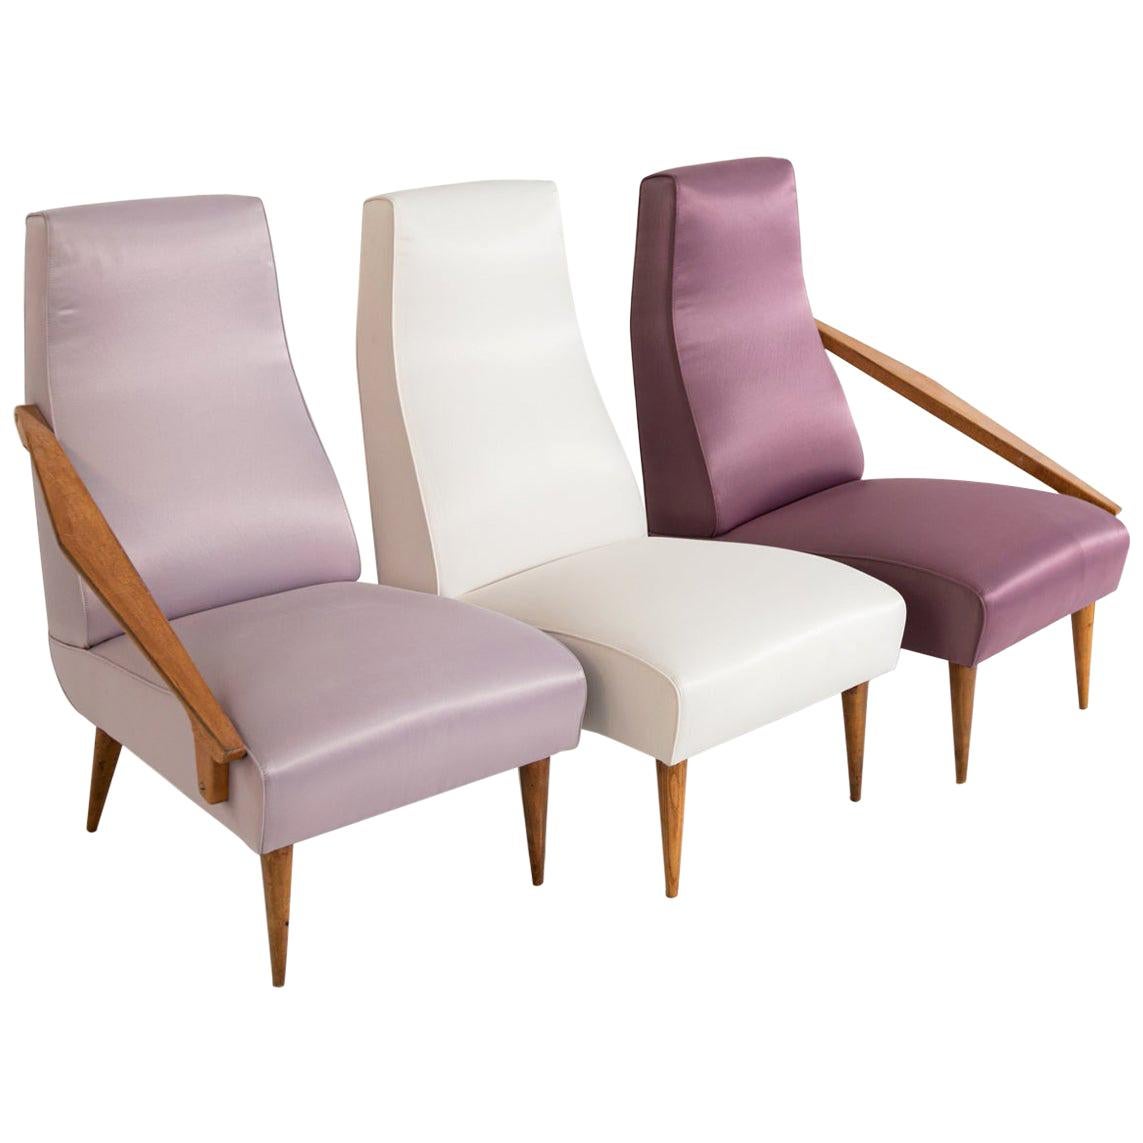 Gio Ponti Attributed and Fils Edition Set of Three Armchairs, circa 1955 For Sale